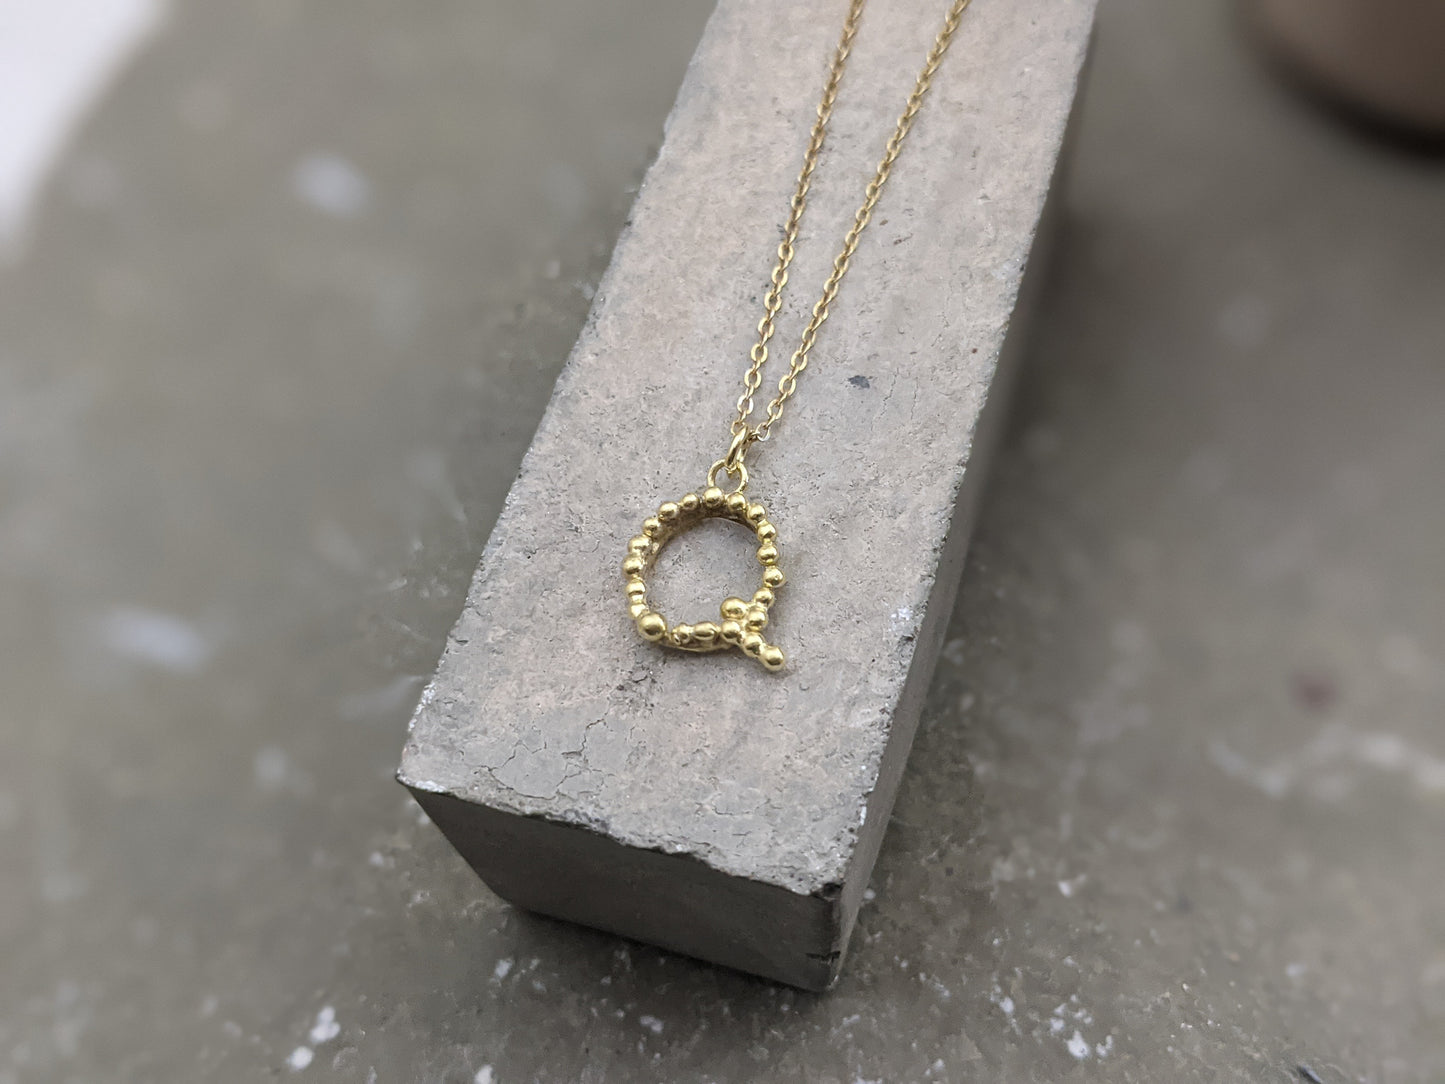 GOLD INITIAL PENDANT Solid 9Ct Gold All Letters Initial 9Ct Yellow Gold  Letter £59.99 - PicClick UK